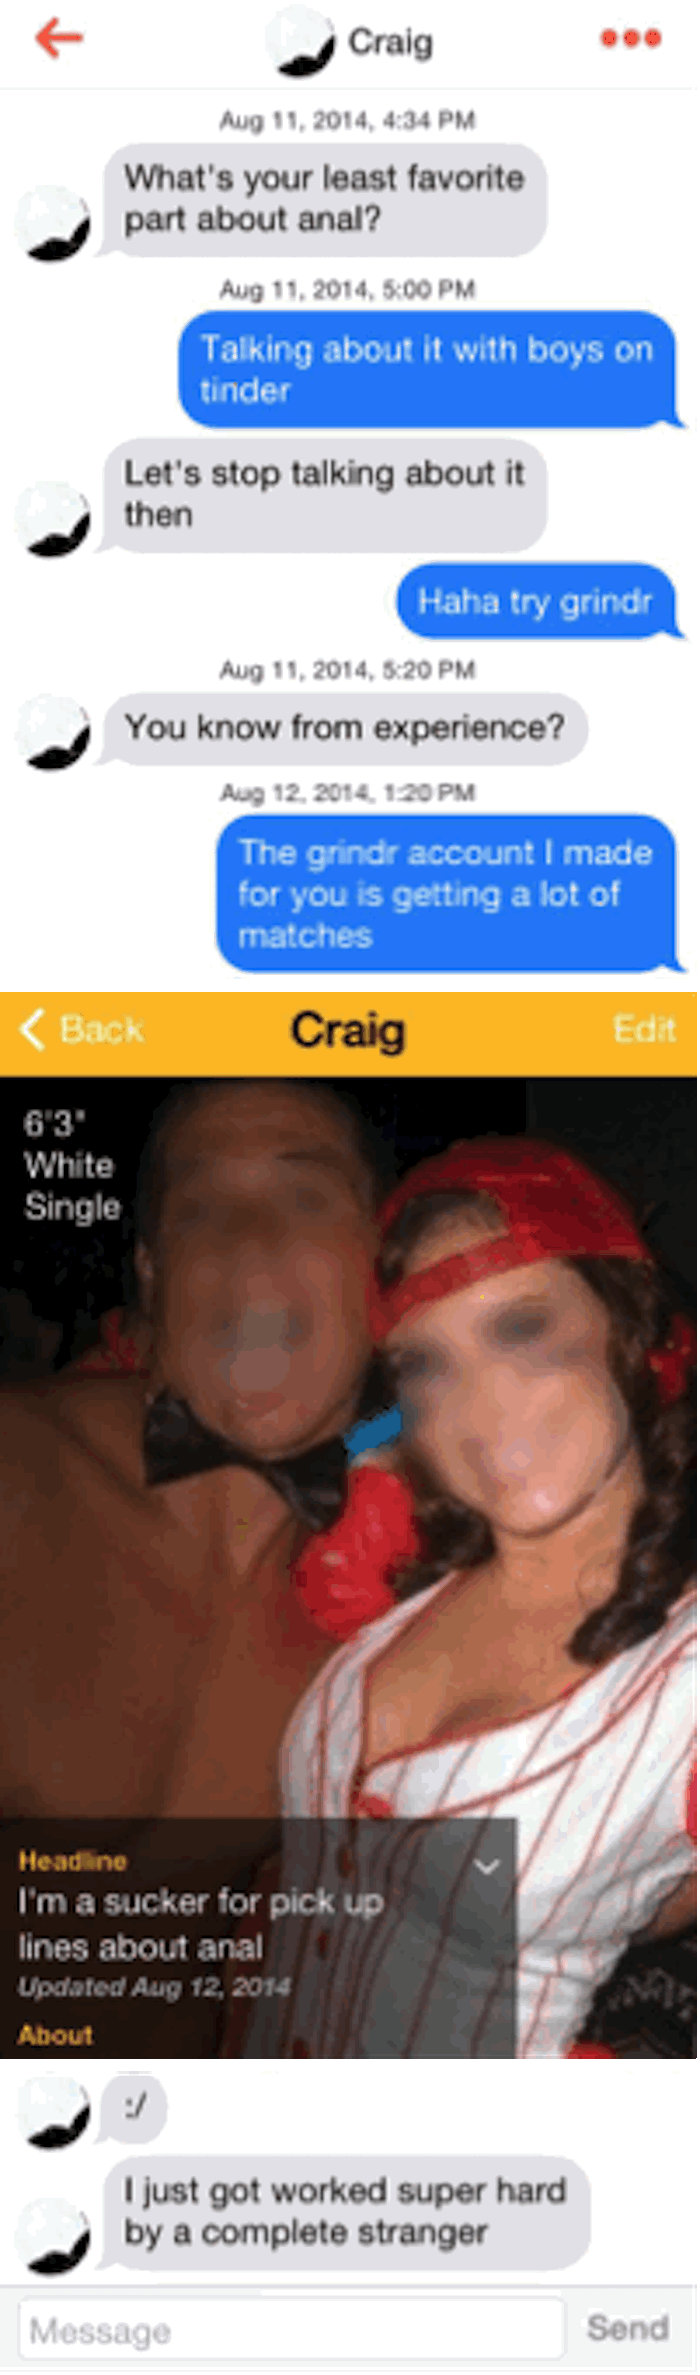 tinder anal memes - Craig , What's your least favorite part about anal? , Talking about it with boys on tinder Let's stop talking about it then Haha try grindir , You know from experience? Aug 12. 2014, The grindr account I made for you is getting a lot o